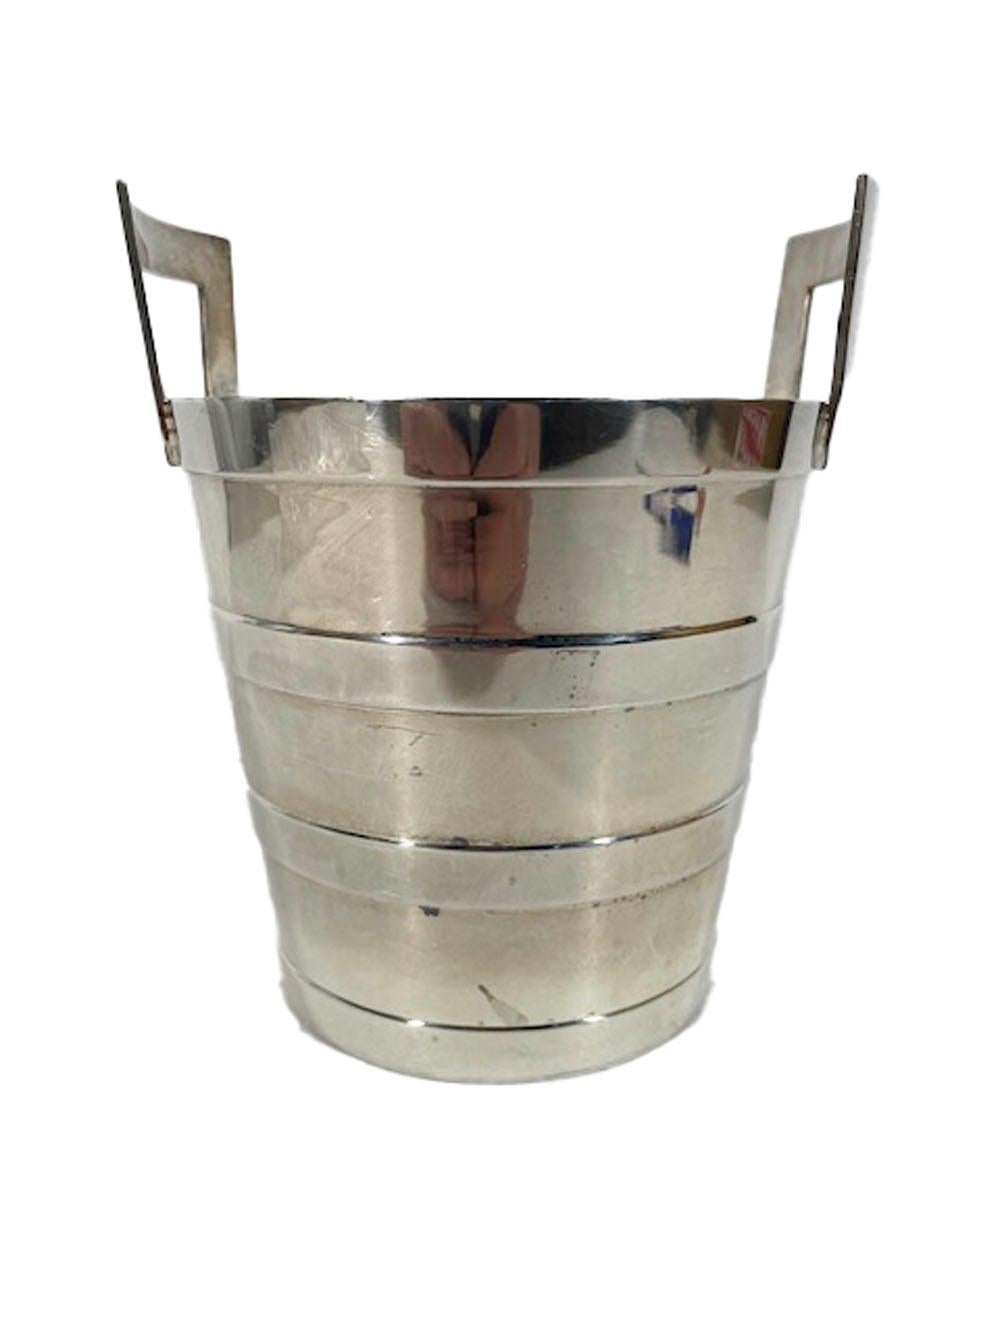 Art Deco silver plate ice bucket in the form of a banded, staved wooden pail or tub with raised, fixed square handles. Made by Walker & Hall, Sheffield, England.